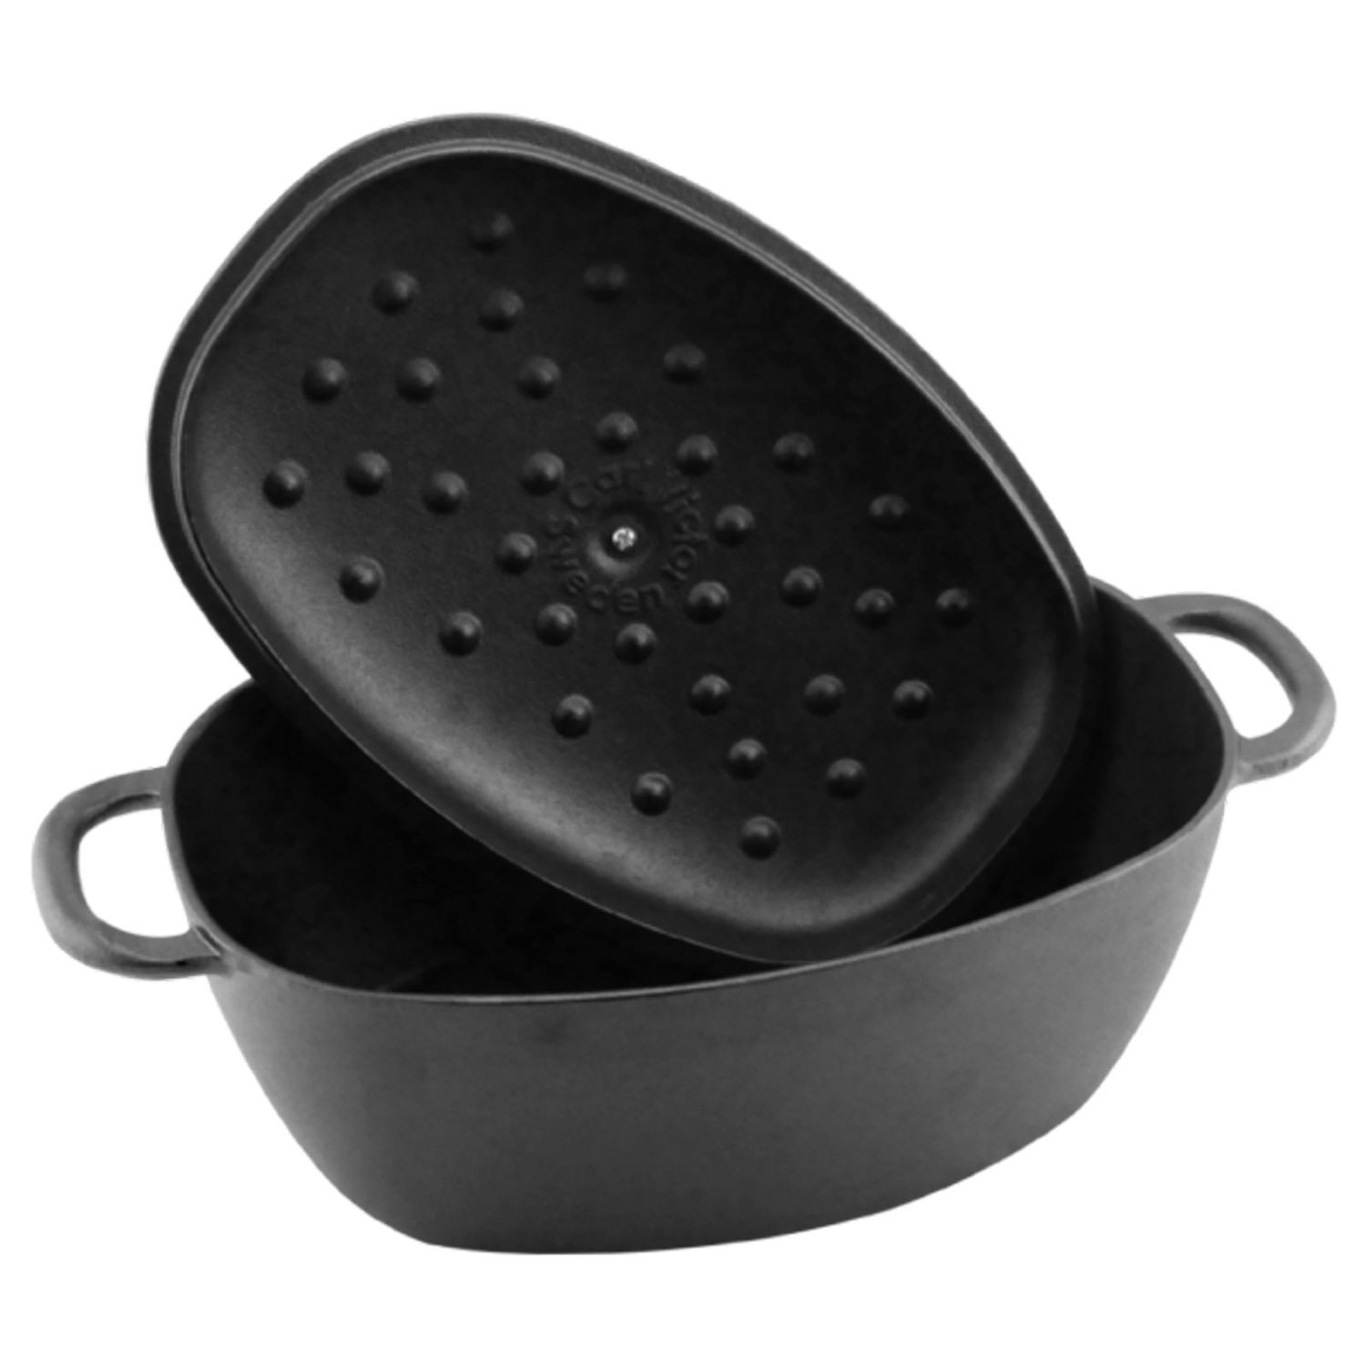 https://royaldesign.com/image/2/carl-victor-oval-cast-iron-pot-with-lid-6-l-4?w=800&quality=80